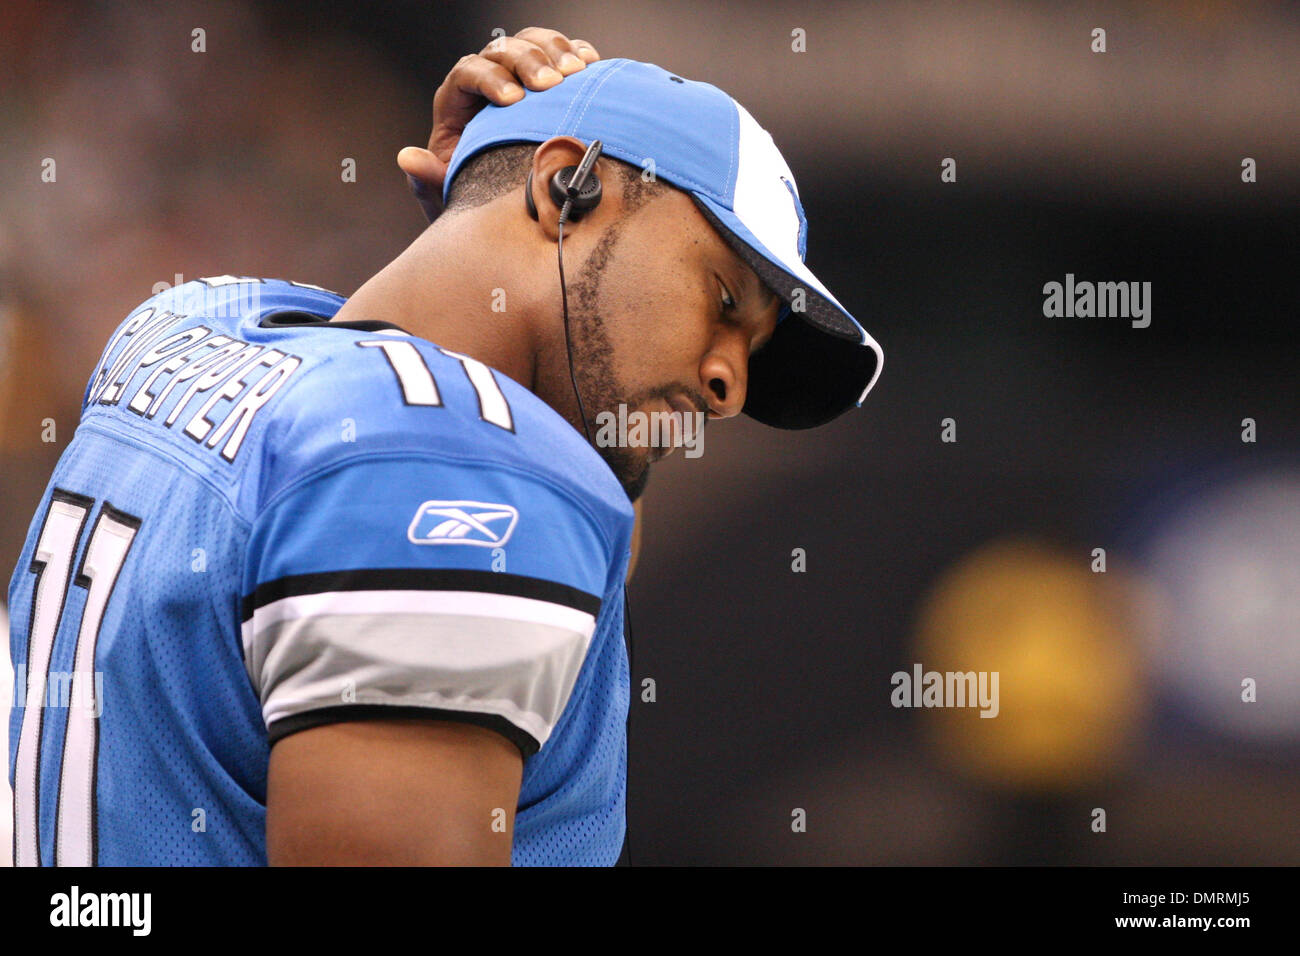 Detroit Lions quarterback Daunte Culpepper (11). The New Orleans Saints  defeated the Detroit Lions 45-27 in the matchup held at the Louisiana  Superdome in New Orleans, LA. (Credit Image: © Matt Lange/Southcreek